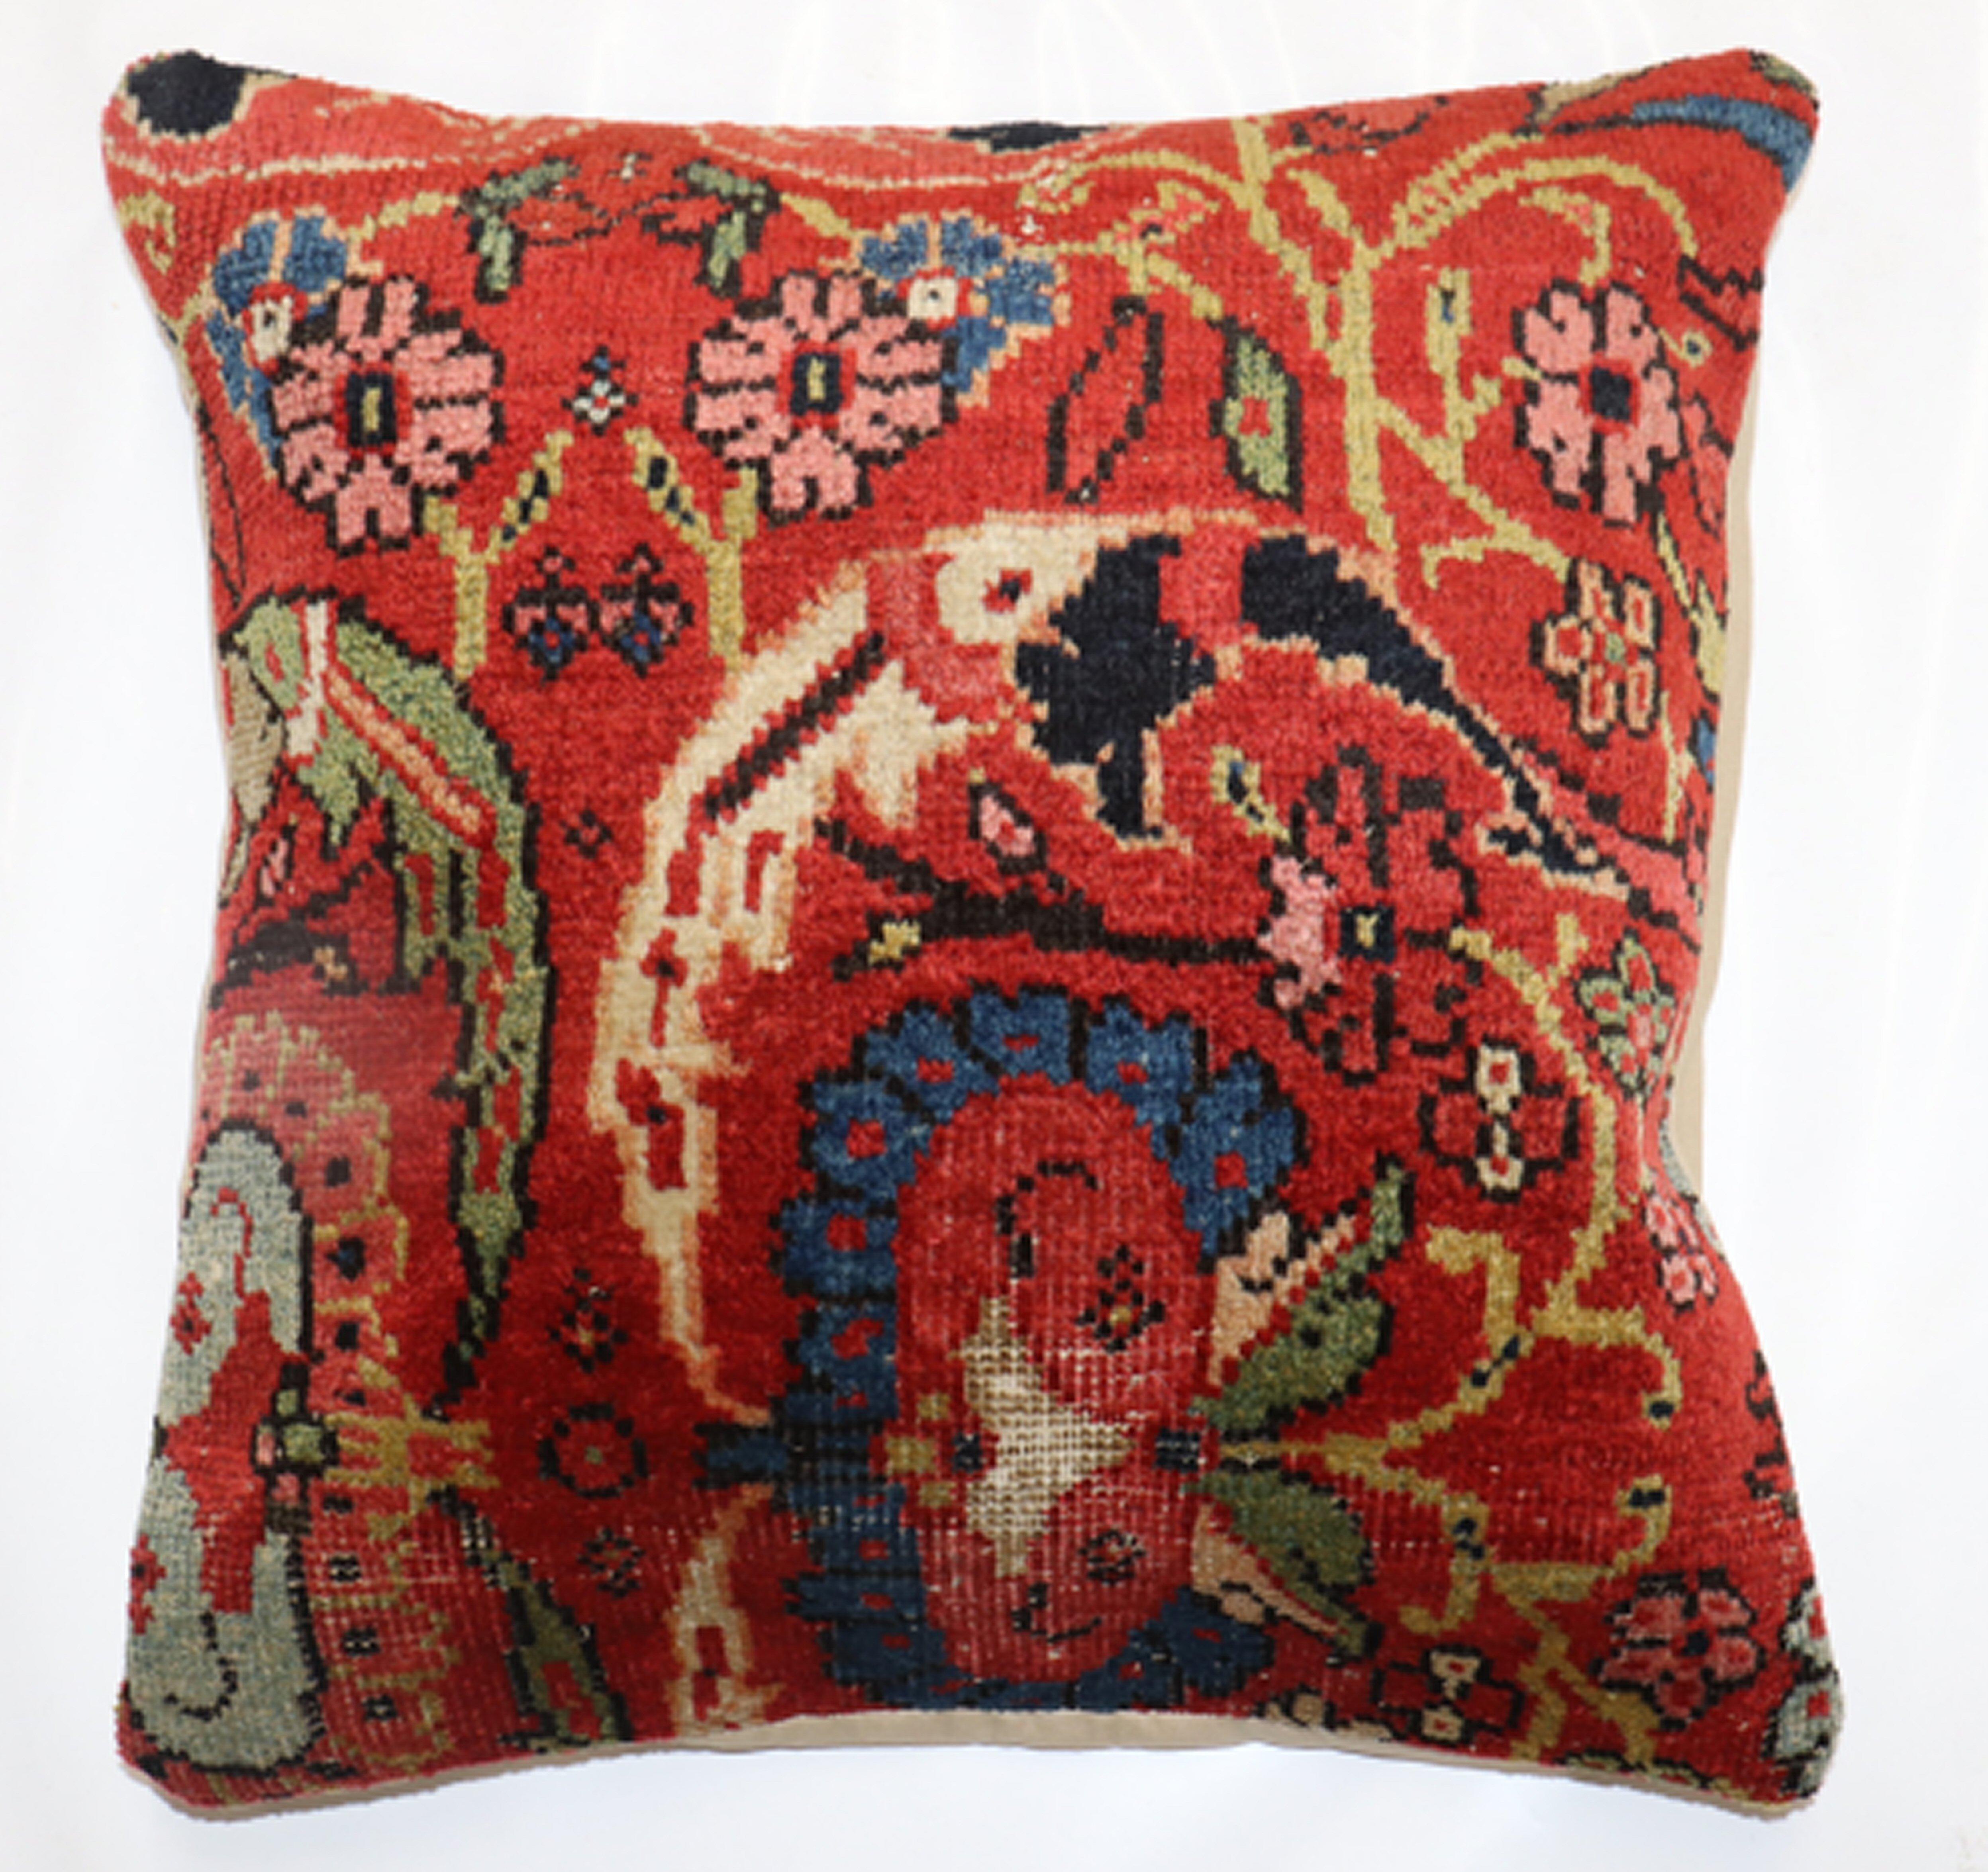 Pillow made from an antique Persian Mahal rug.

Measures: 19” x 19”.